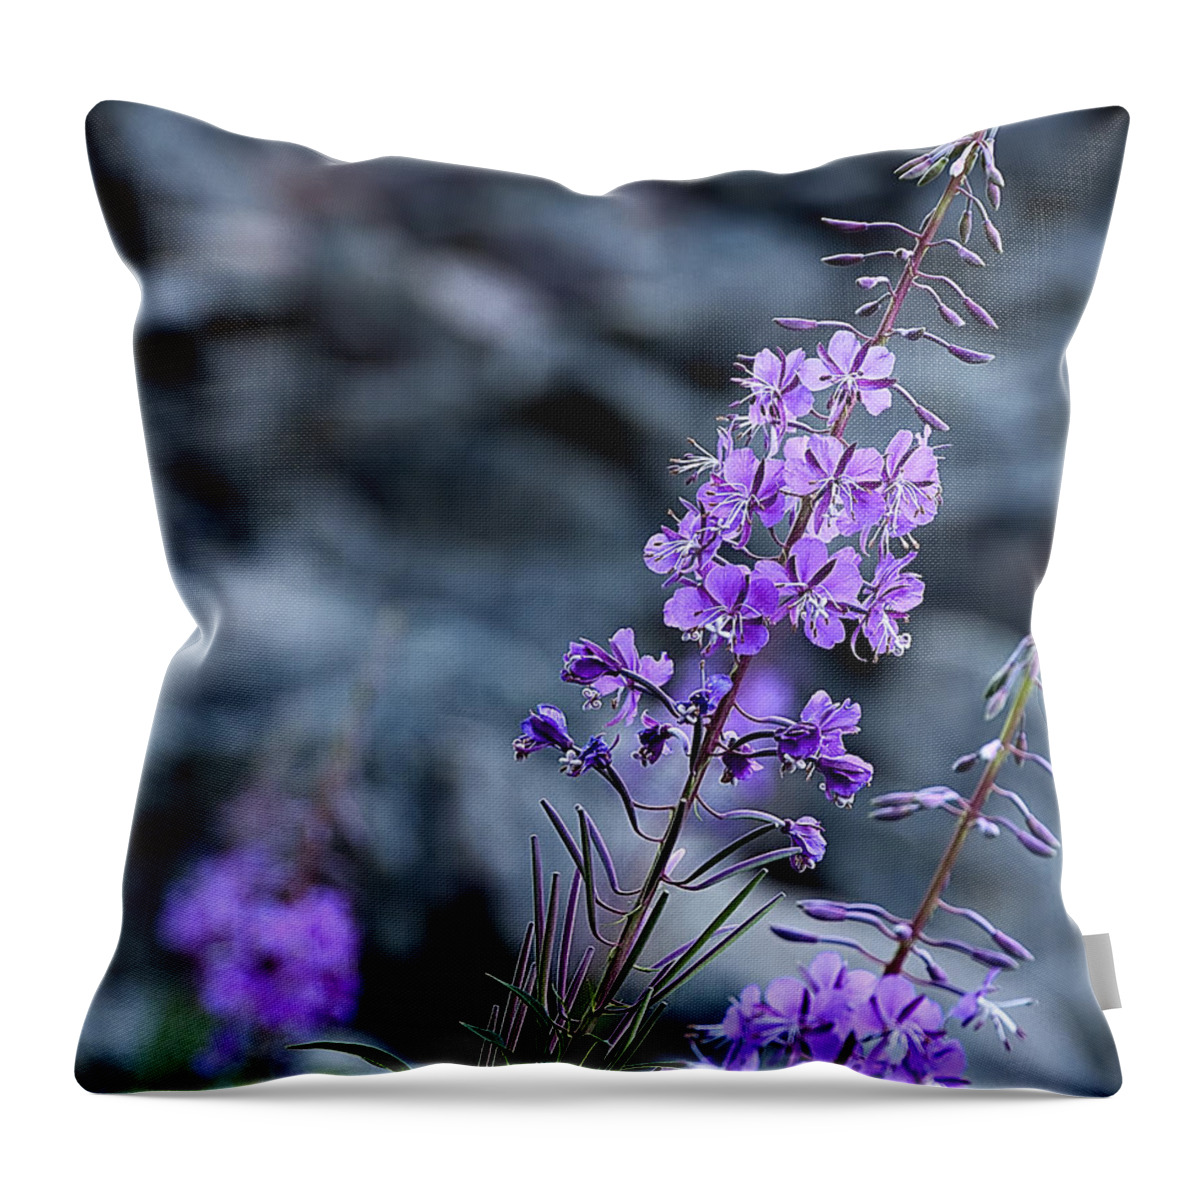 Flowers Throw Pillow featuring the photograph Colorado Wildflower by Barry C Donovan